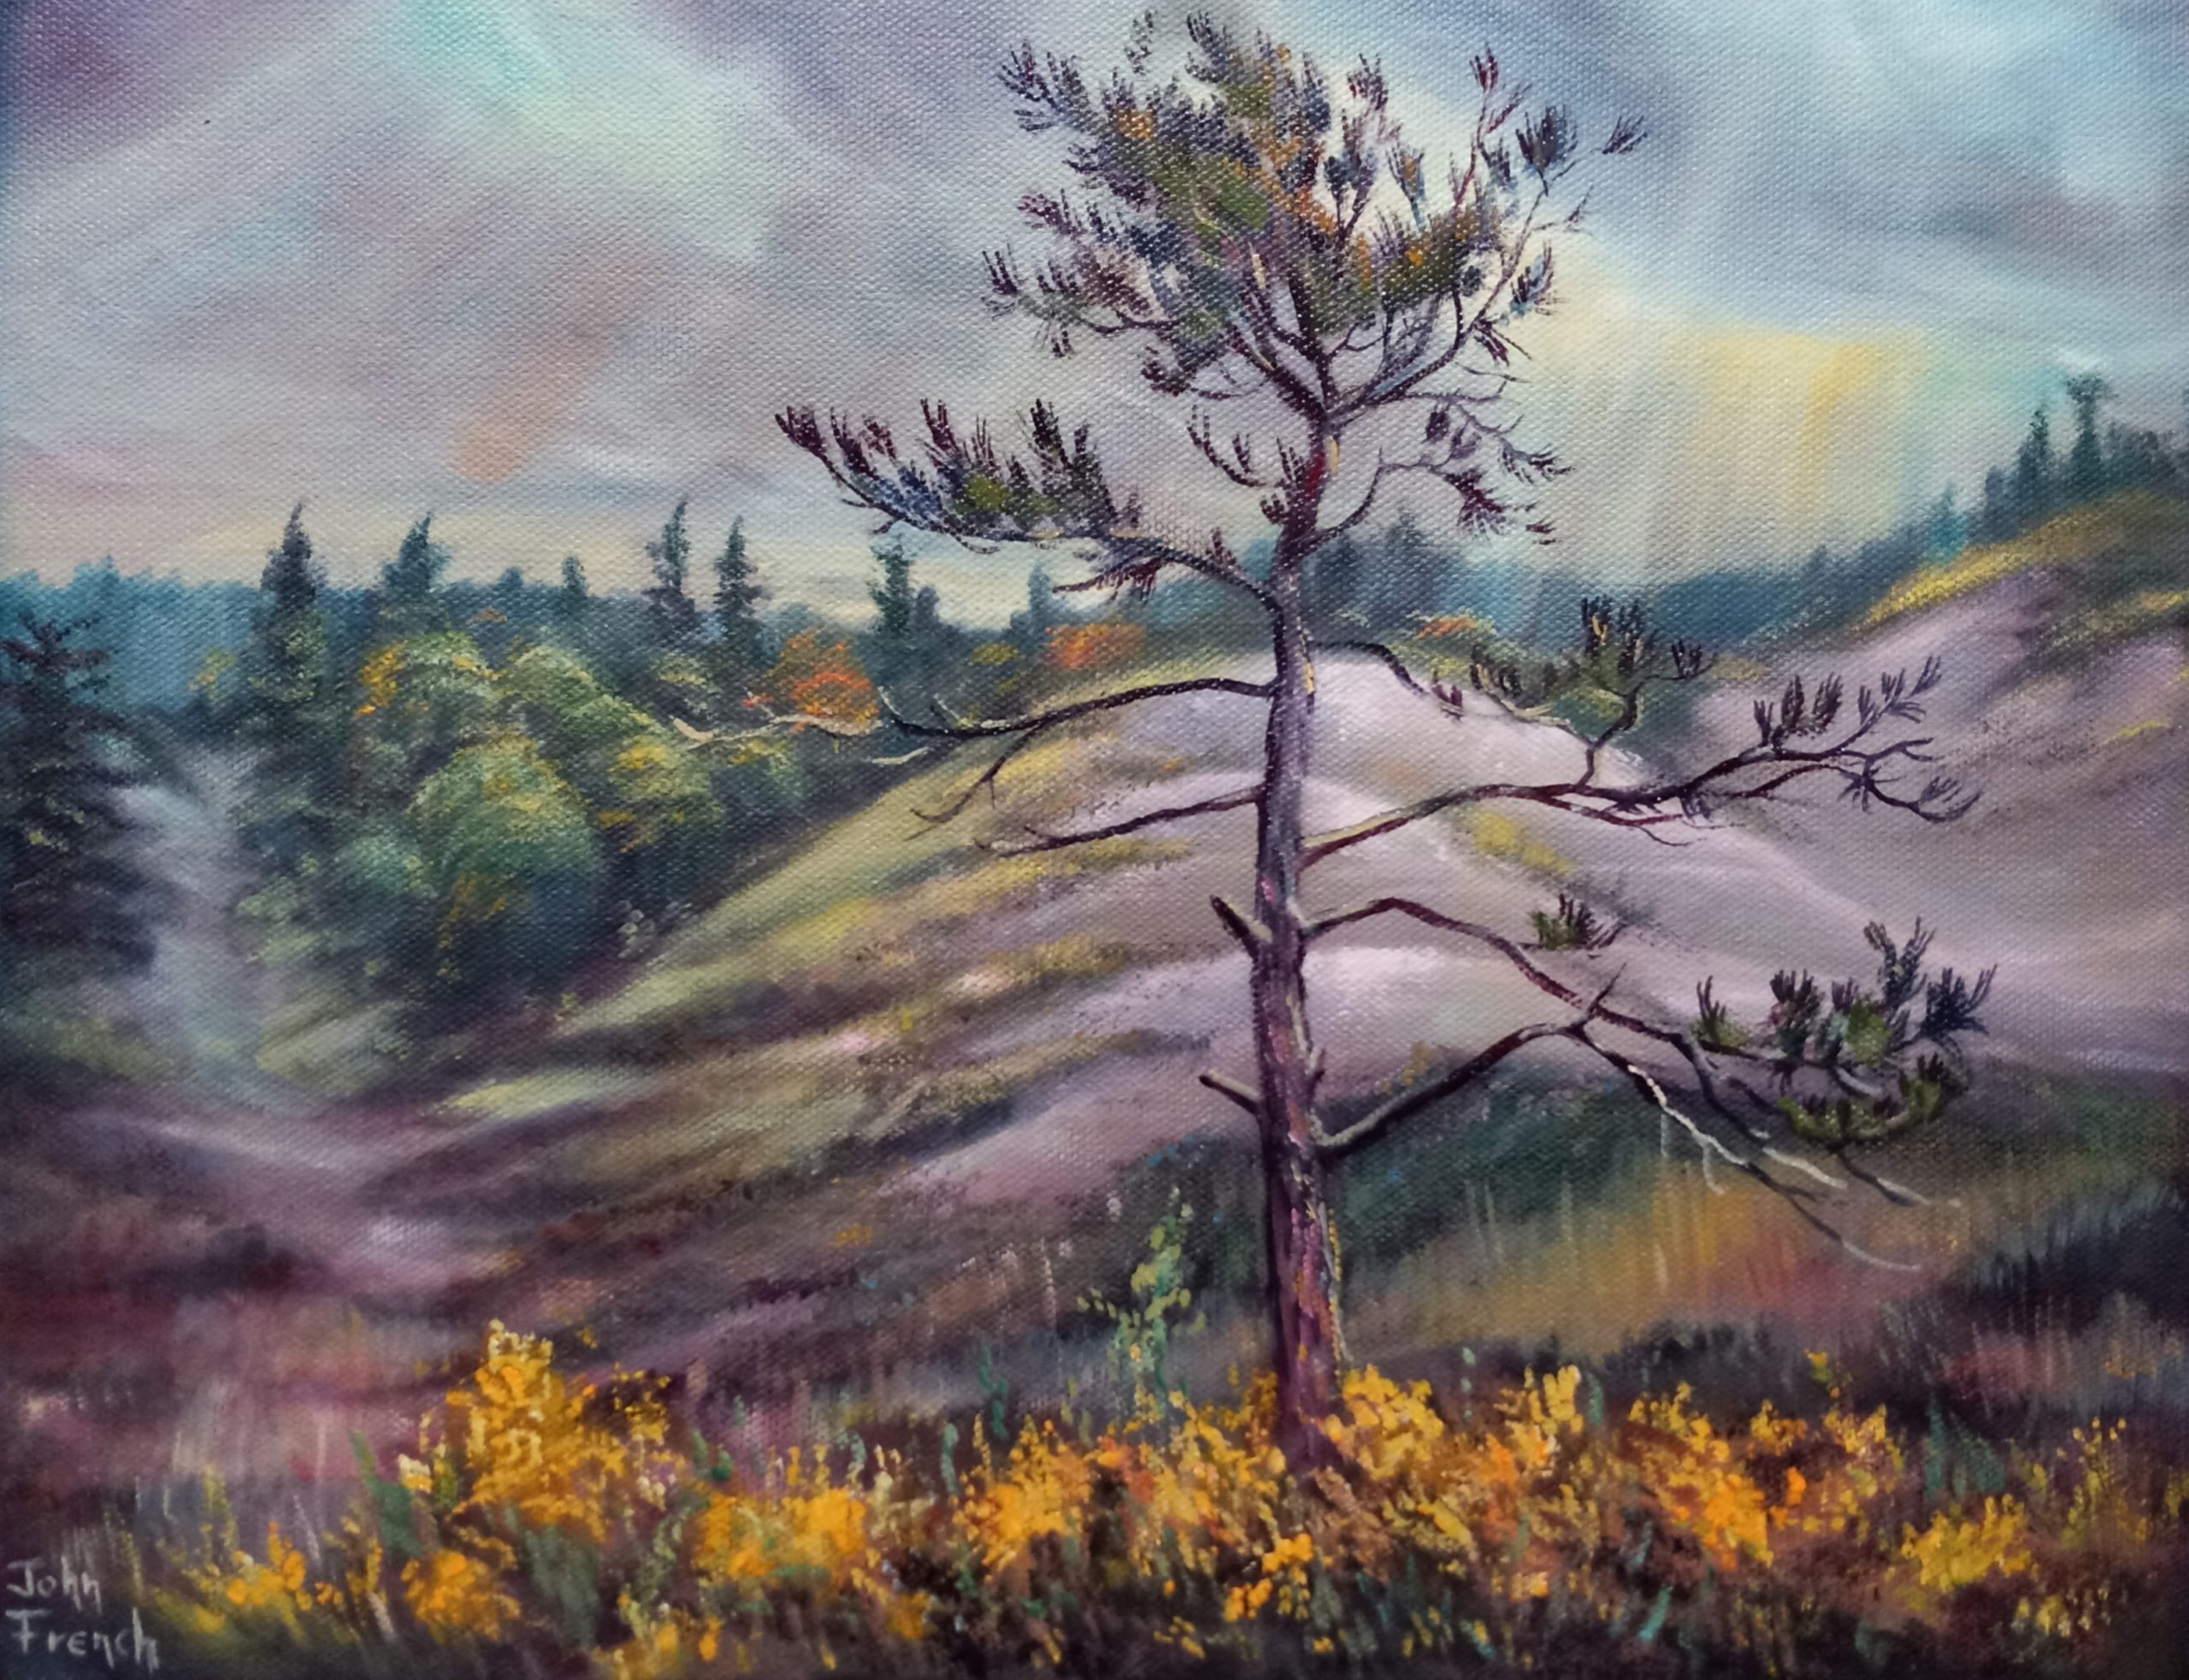 “Twisted Pine in the Dunes” for $260